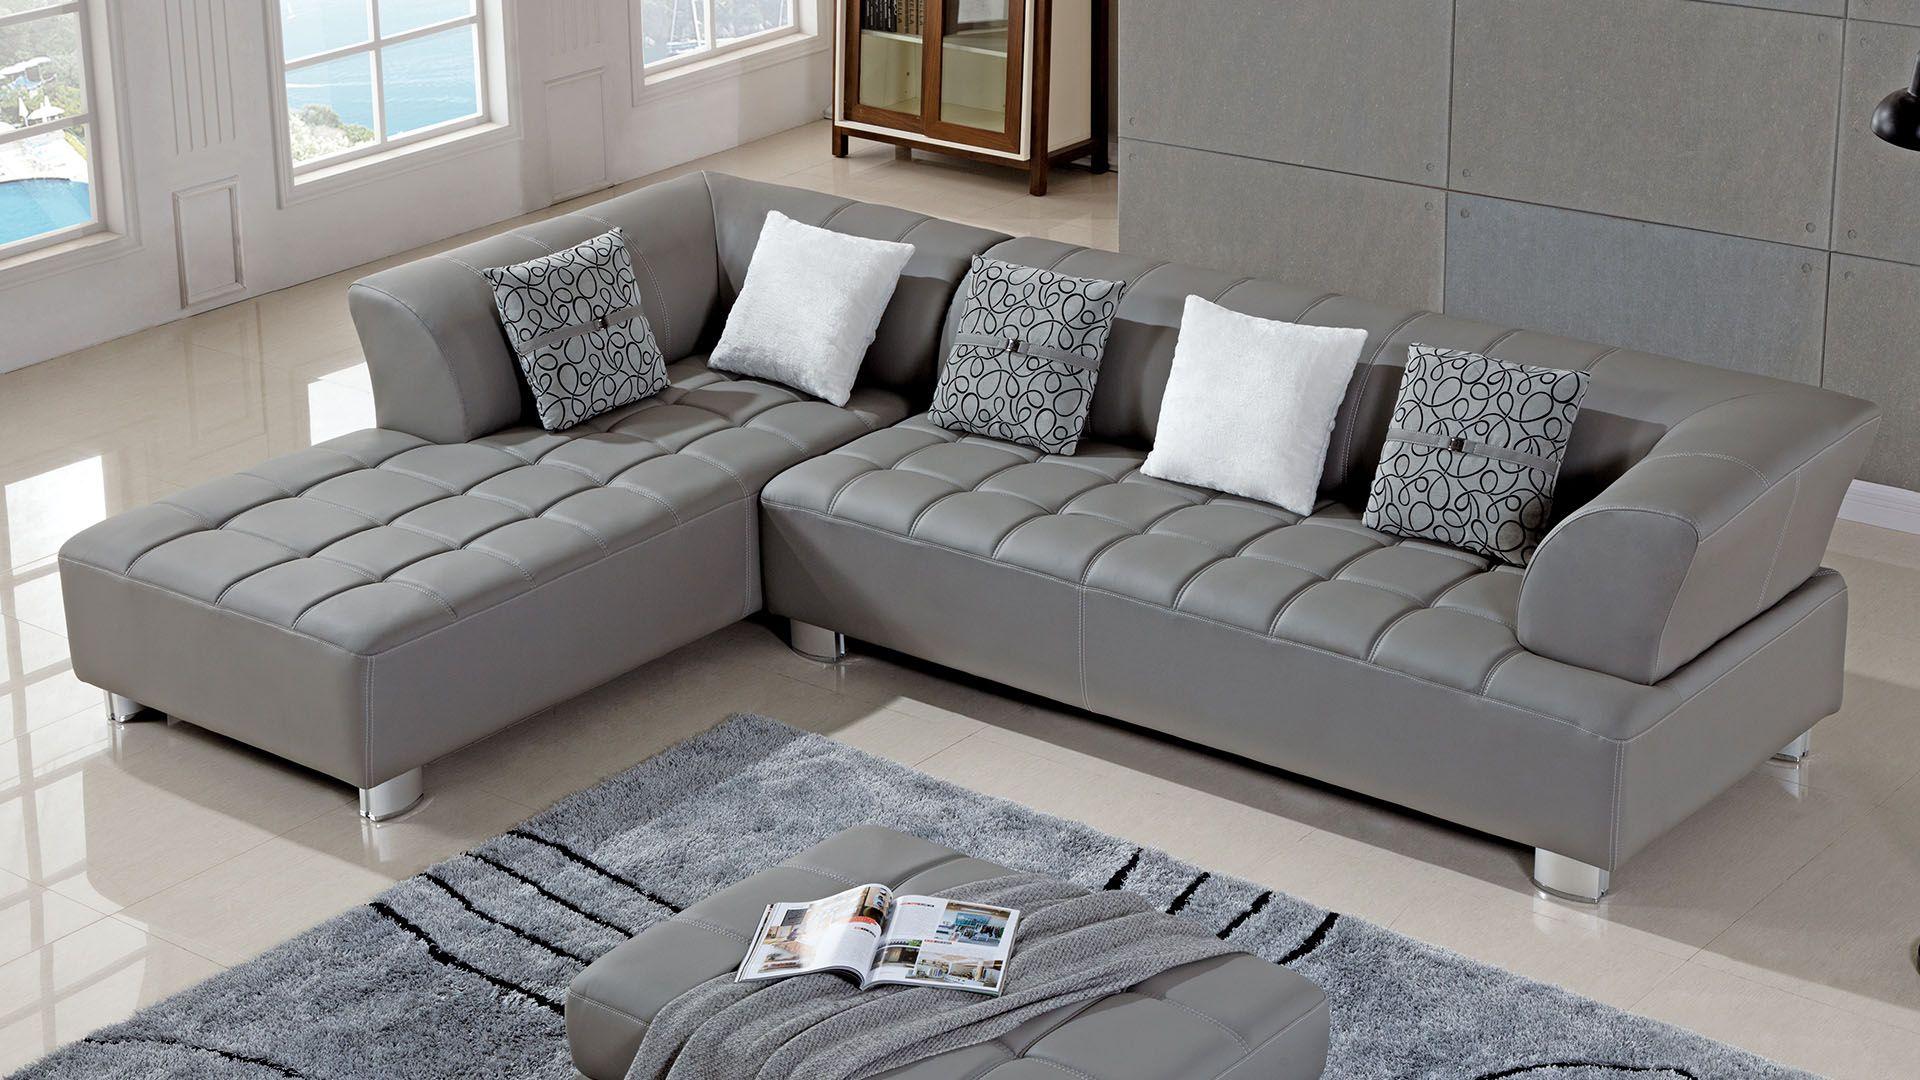 Contemporary, Modern Sectional Sofa Set AE-L138-GR AE-L138L-GR in Gray Faux Leather